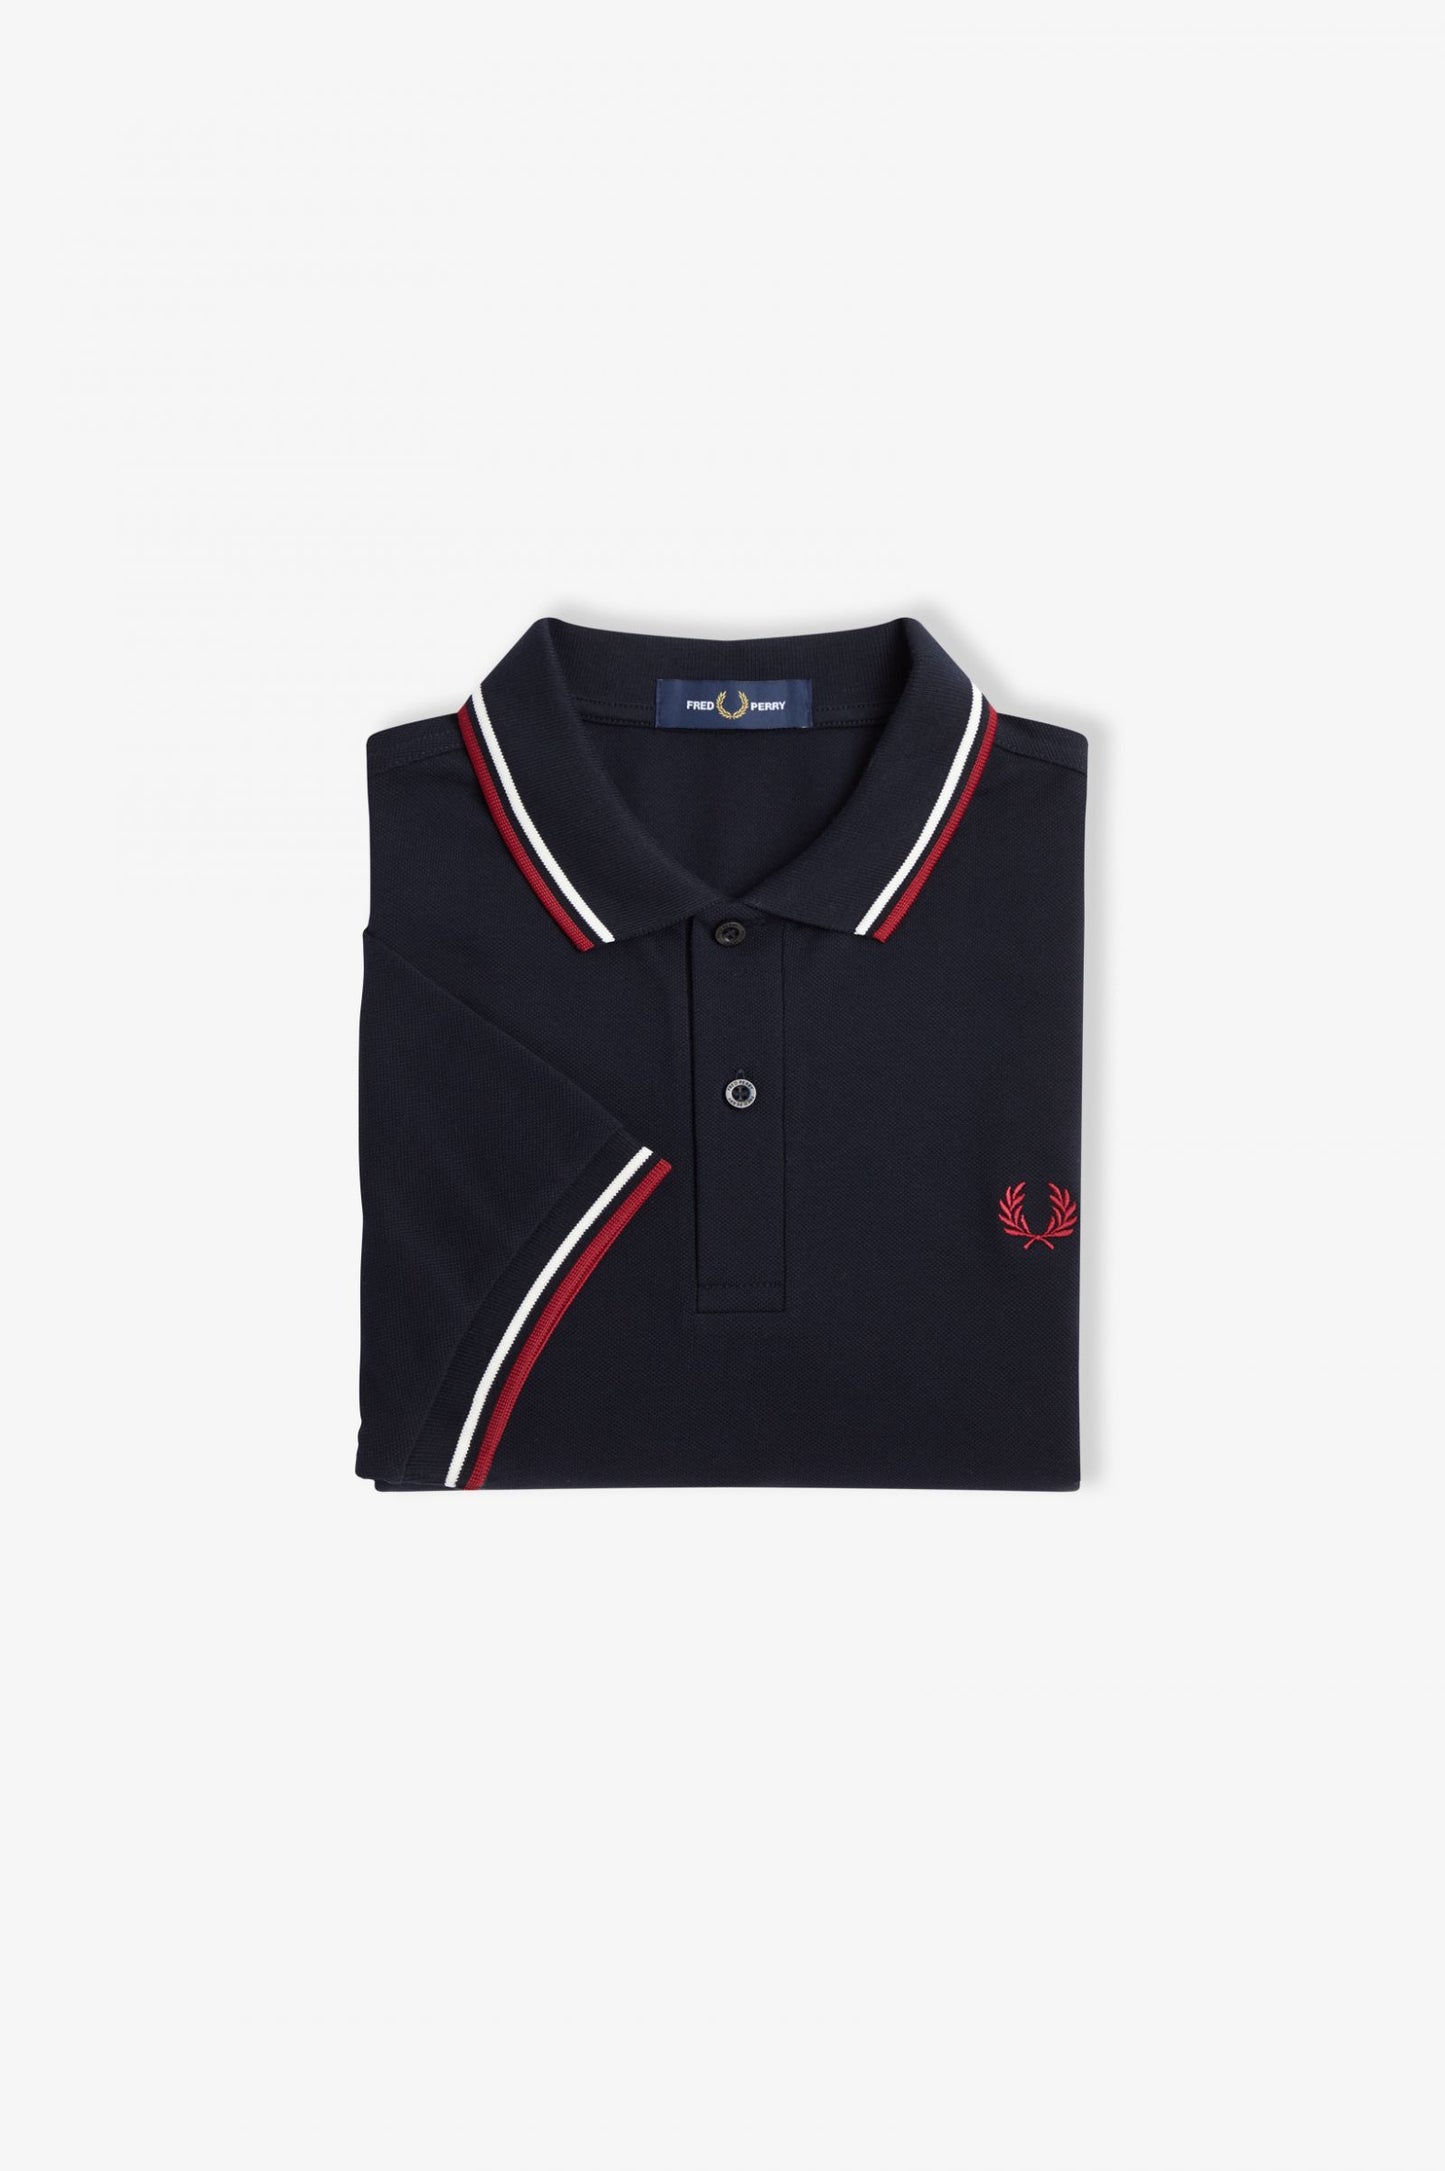 Fred Perry Polo Navy / SWHT / BNTRED